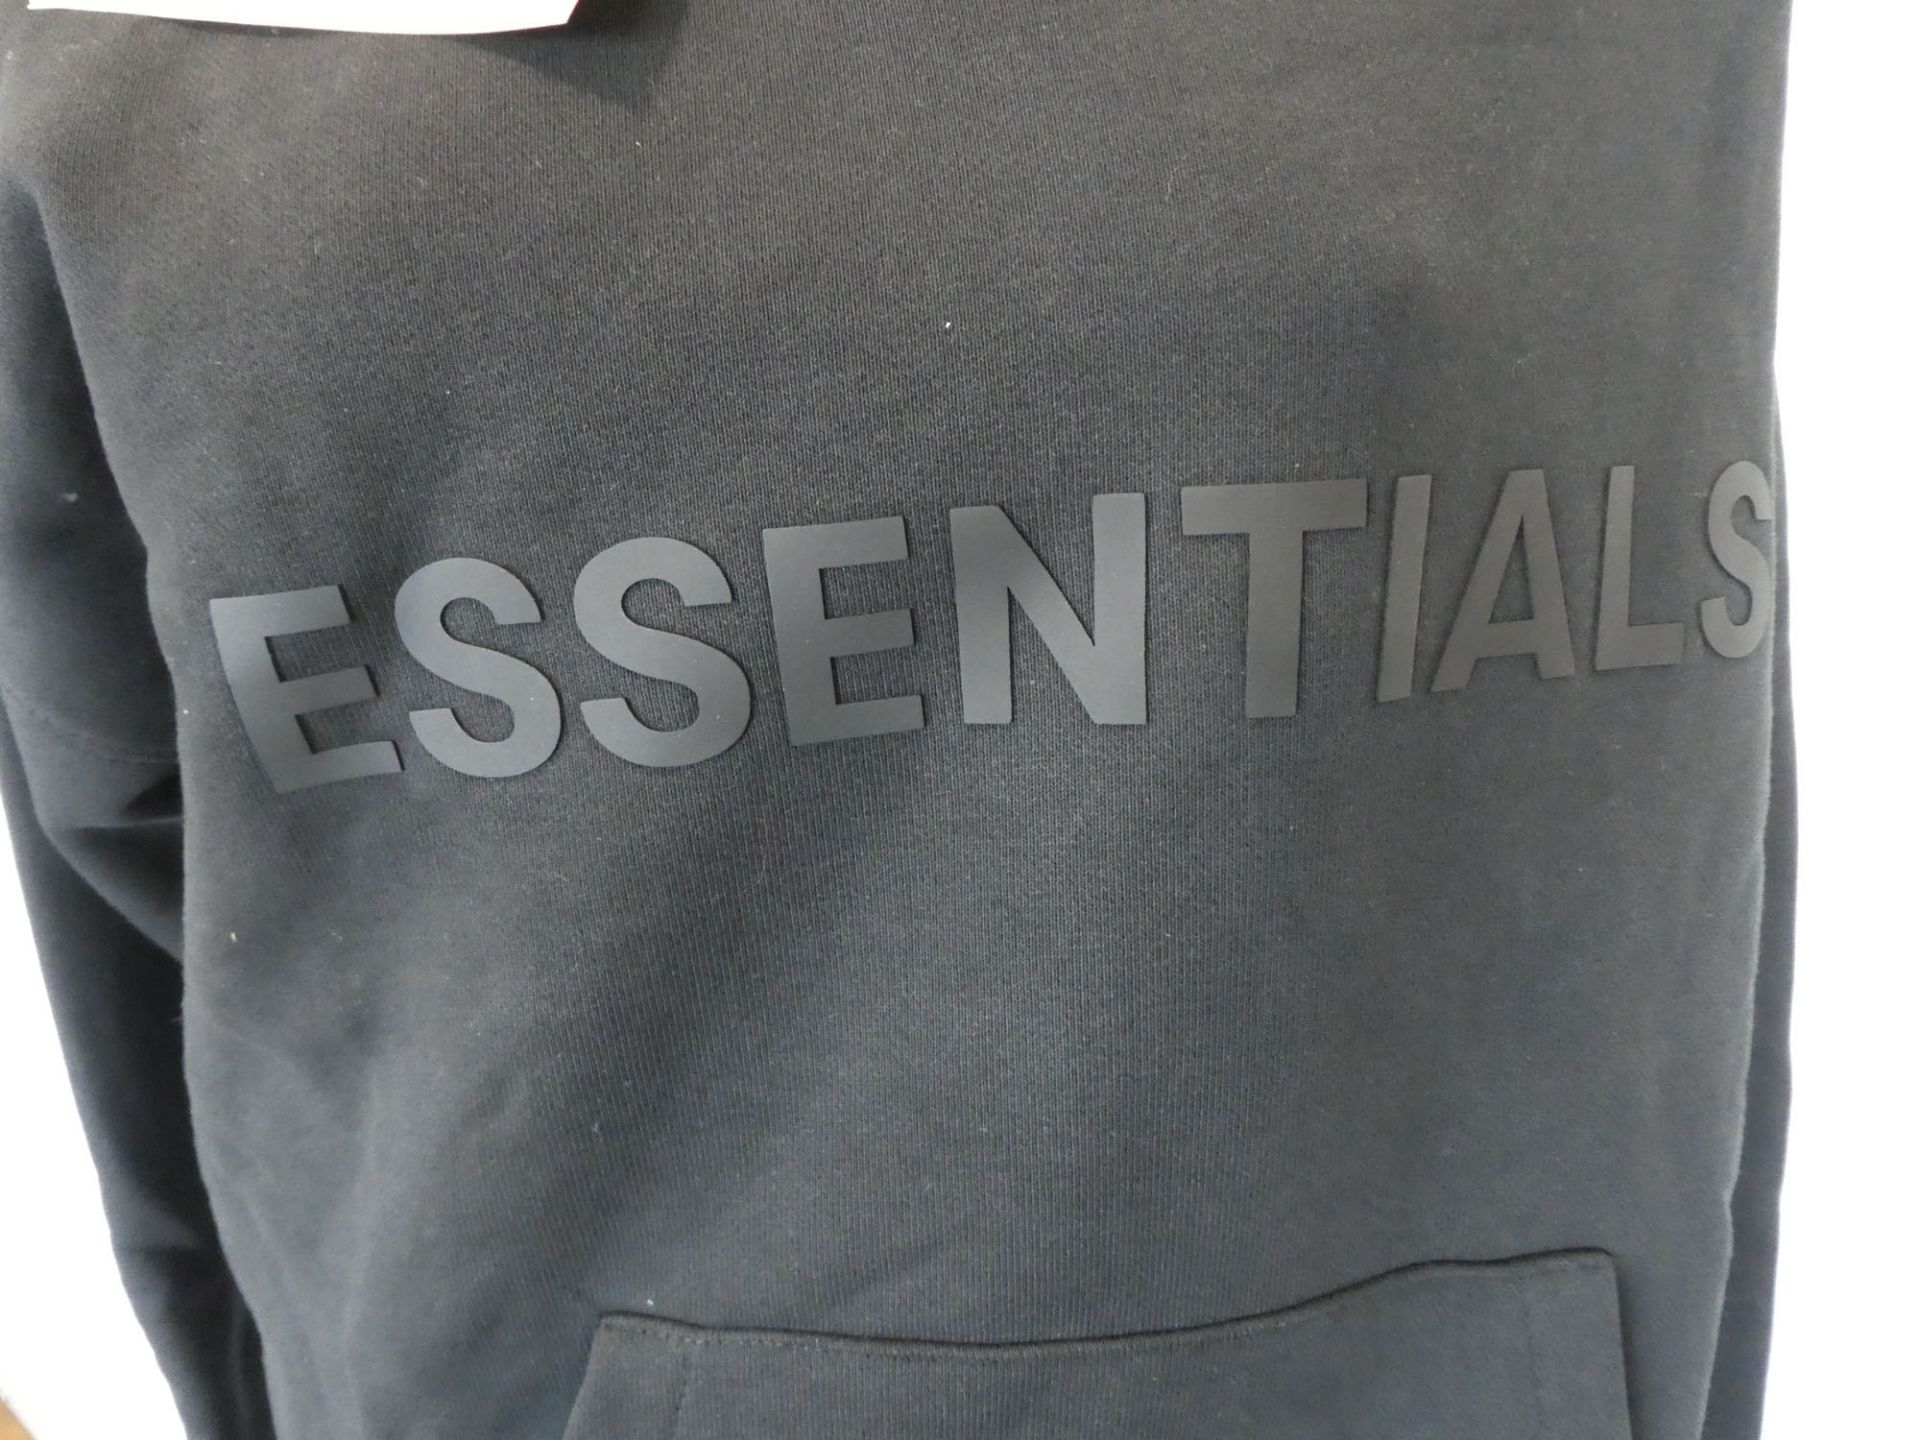 Essentials Fear of God hoodie in black size S - Image 2 of 5